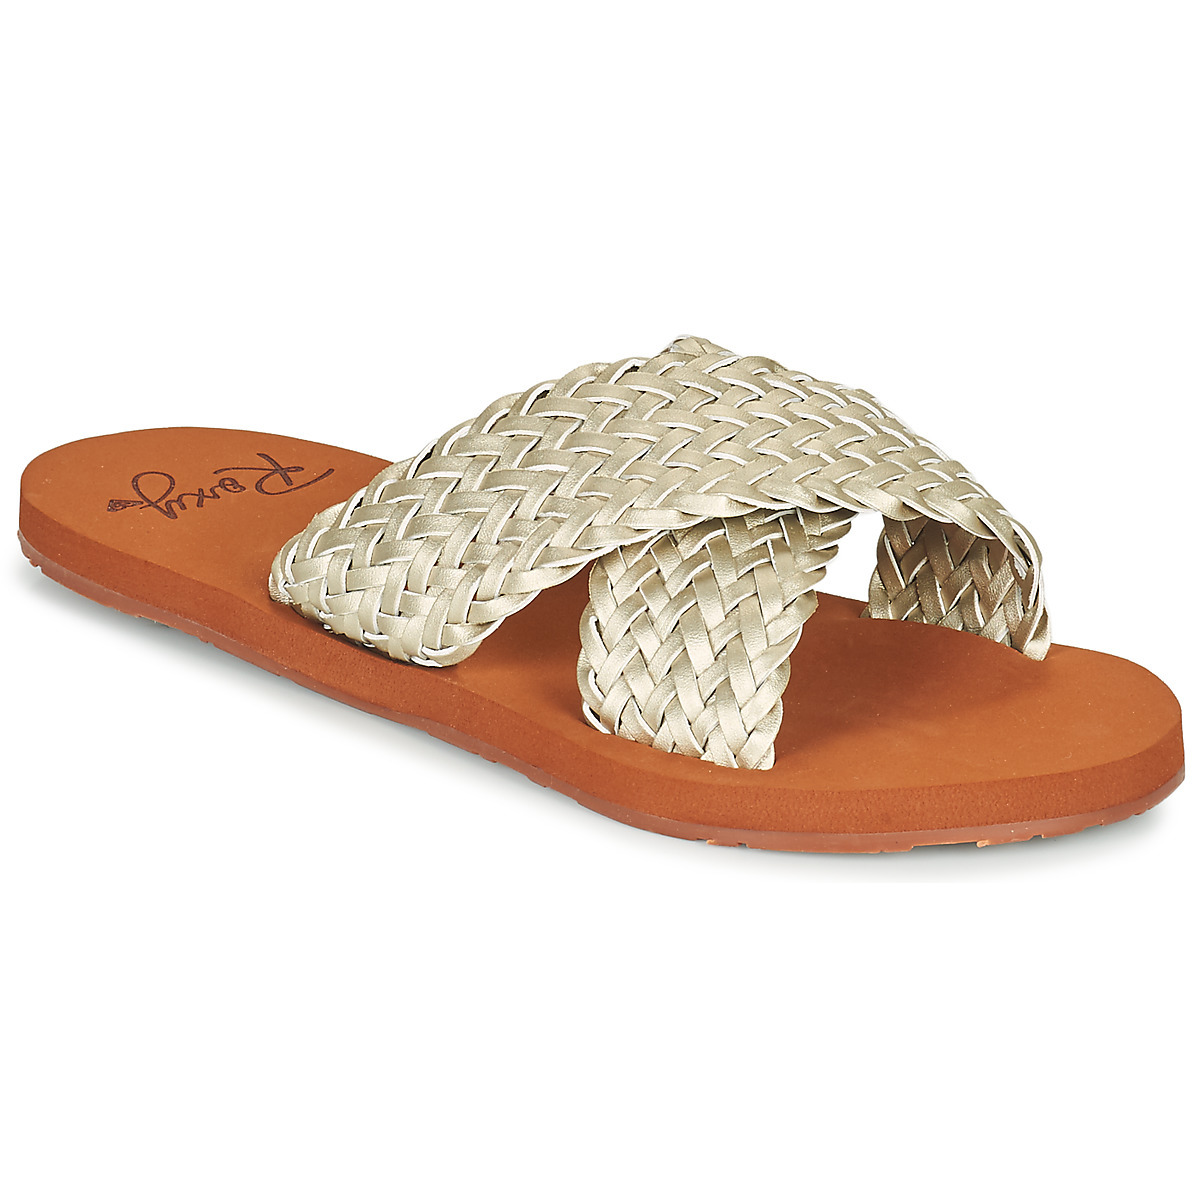 Roxy - Women Slippers in Gold by Spartoo GOOFASH